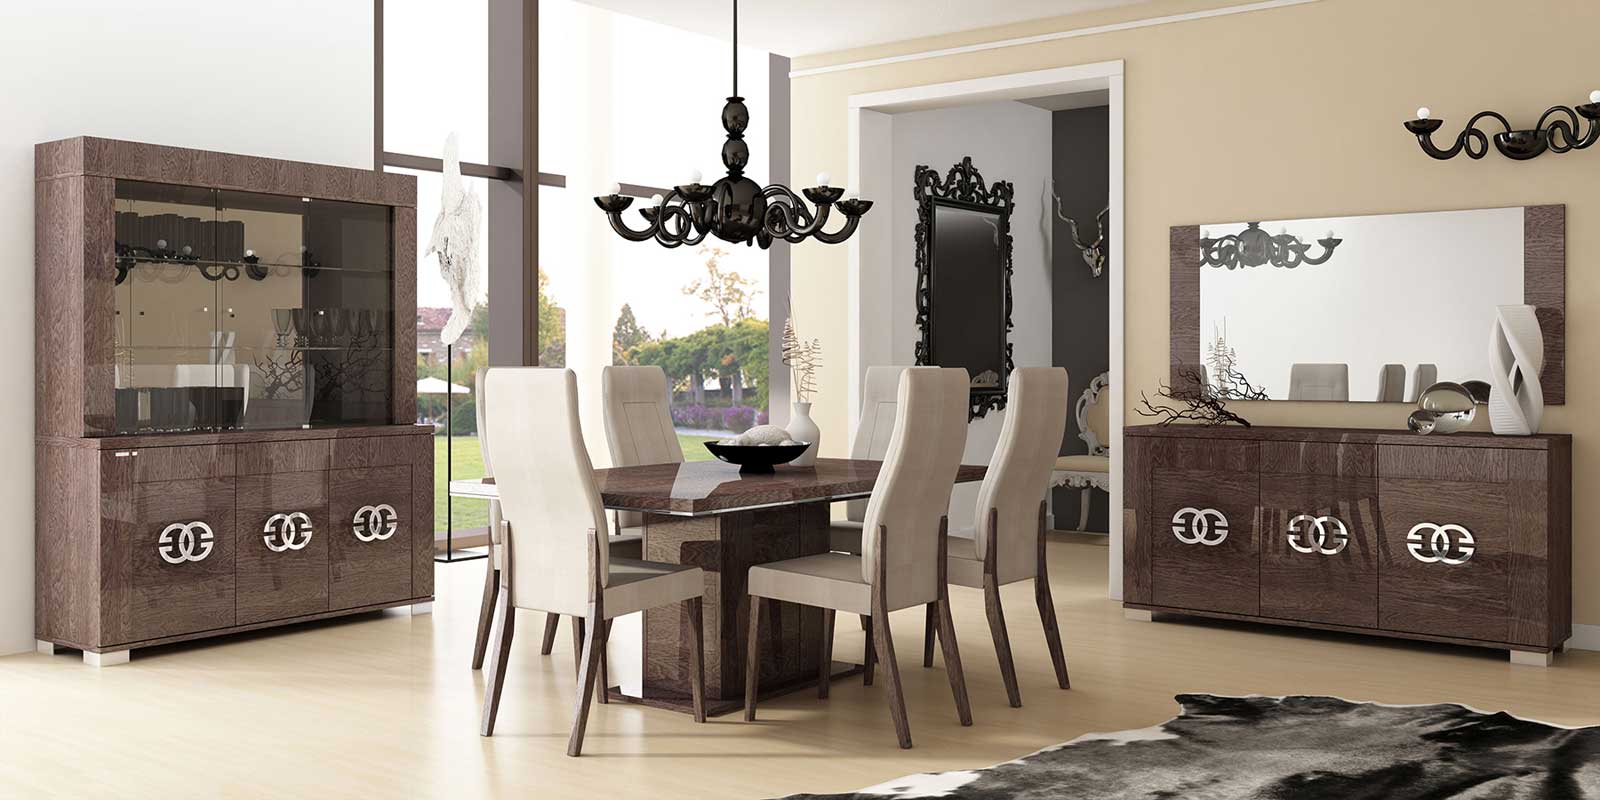 Dining Room Wooden Wonderful Dining Room Furniture Modern Wooden Dining Sets With Contemporary Black Wood Pendant Lamp Models Also Modern Closet Dining Room Furniture Along With Beautiful Mirror Dining Room Design Dining Room Wooden Stylish Of Dining Room Chairs